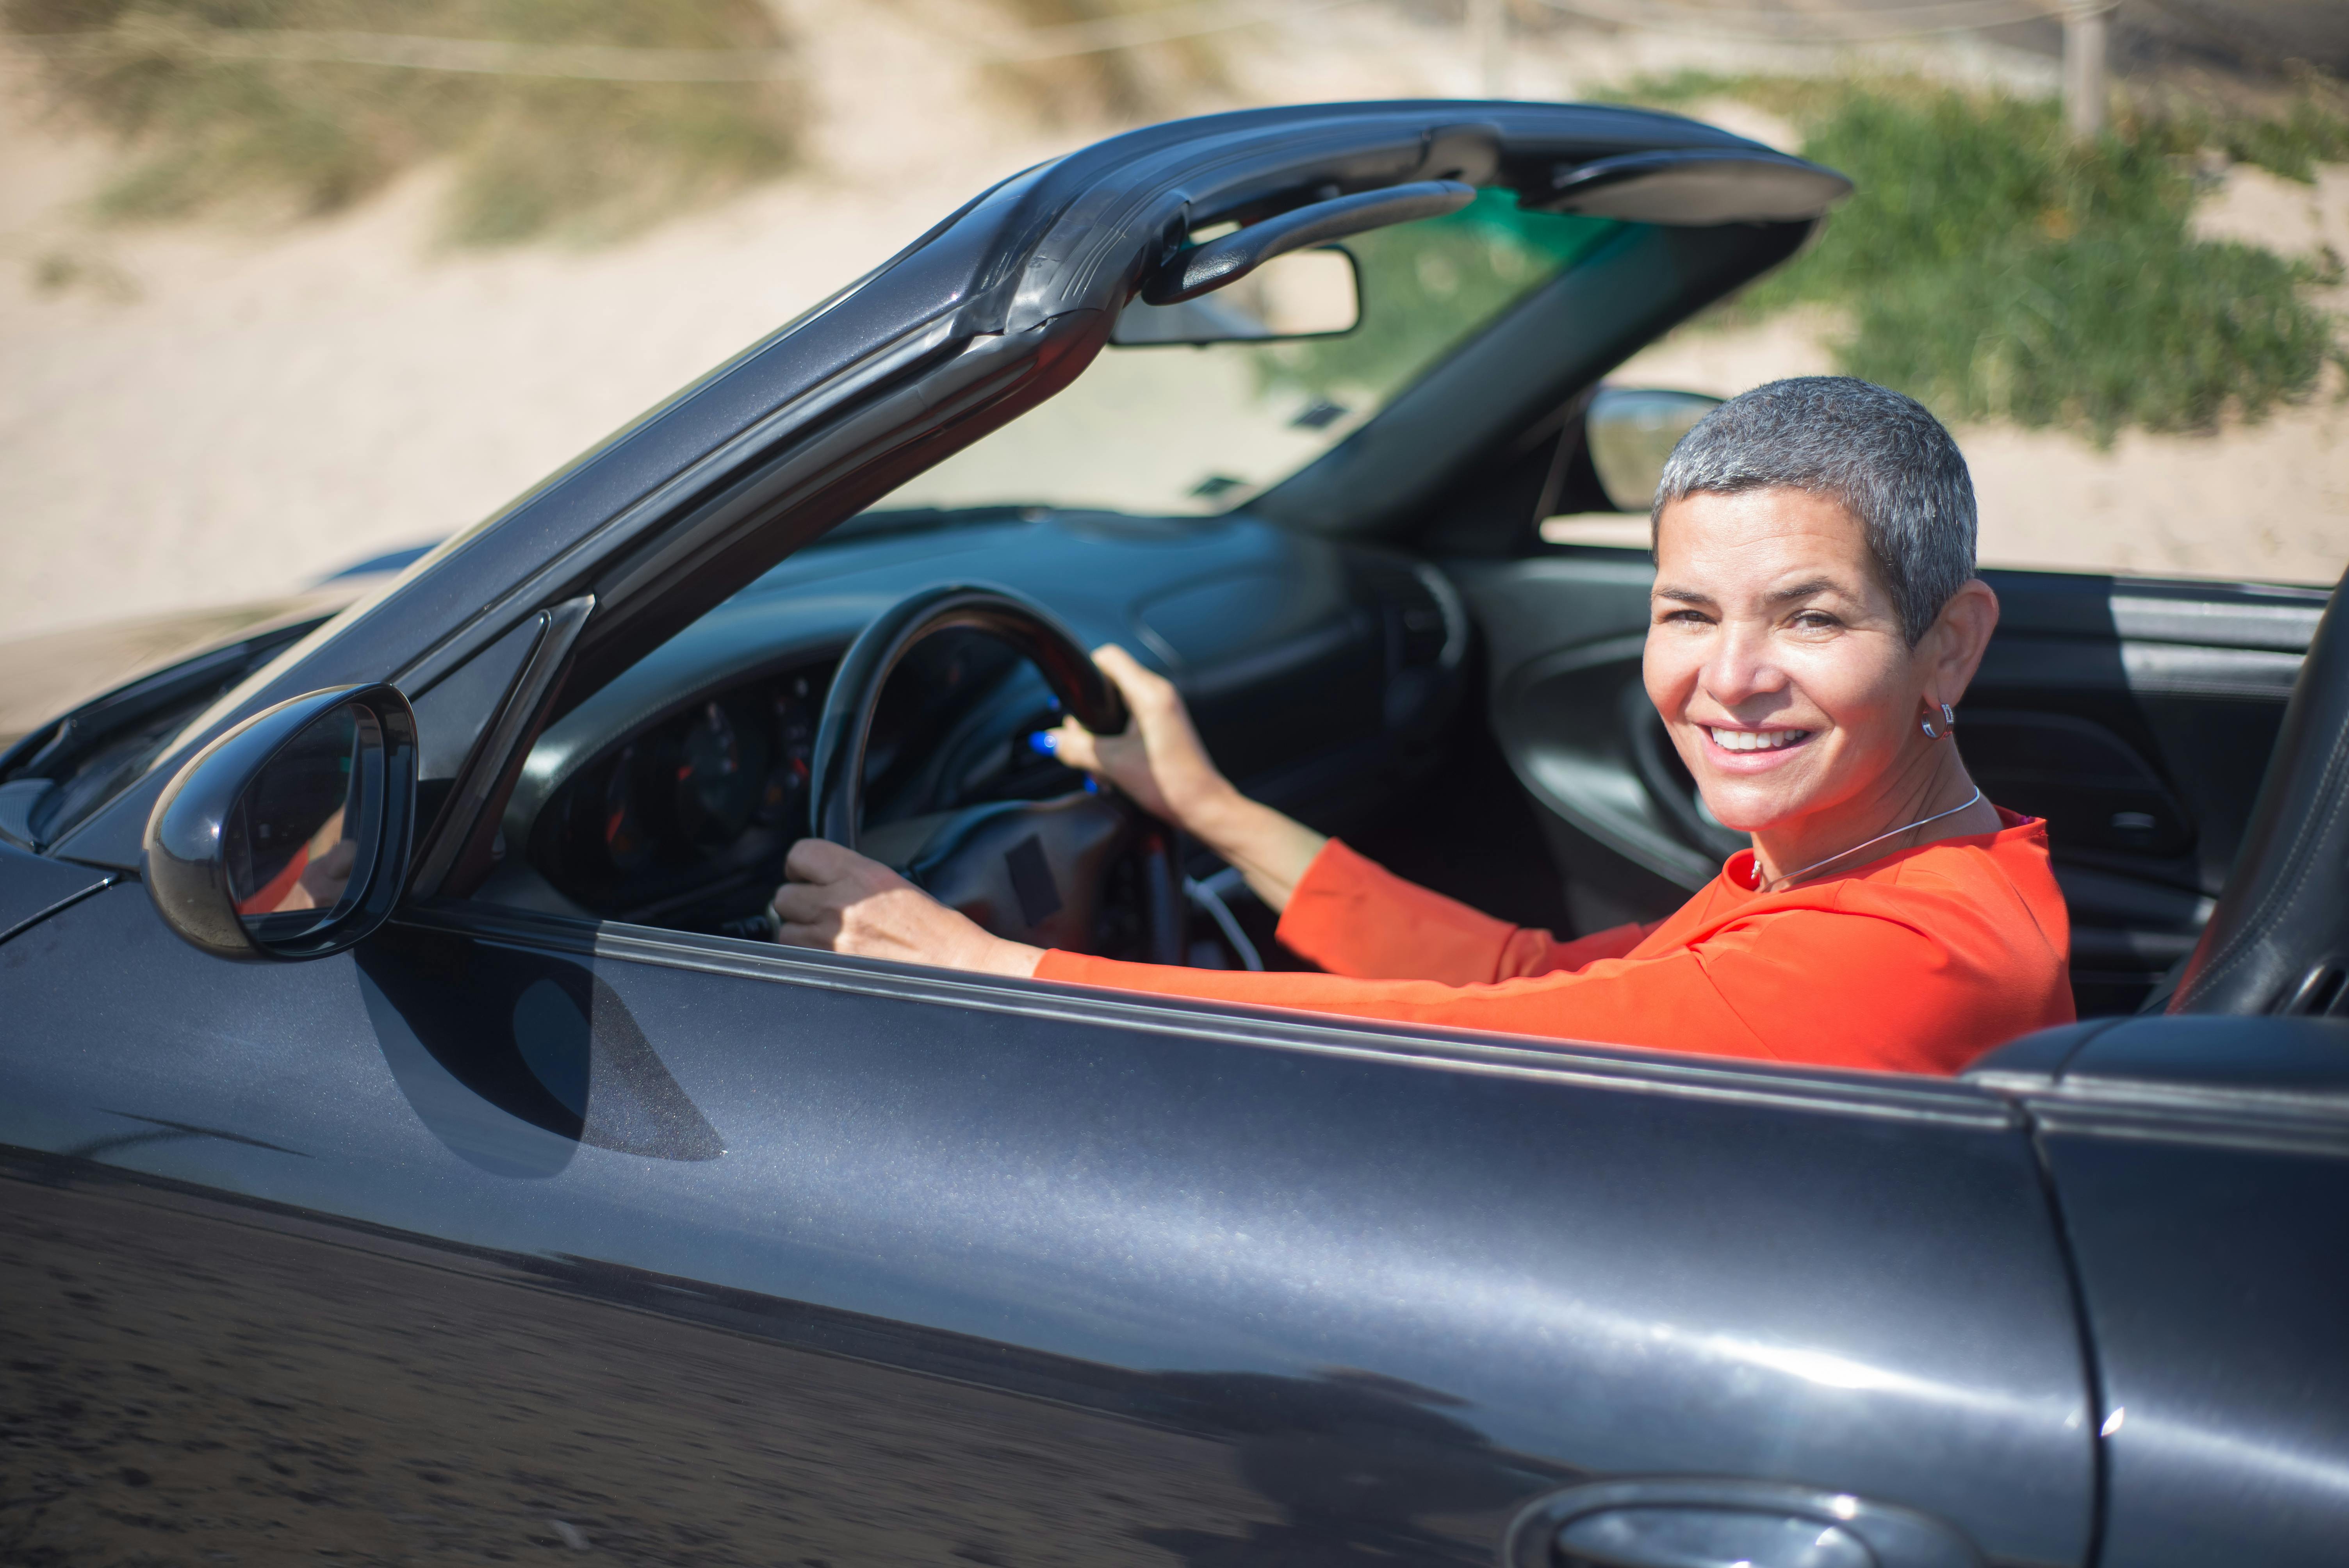 A smiling woman driving a Cabriolet | Source: Pexels